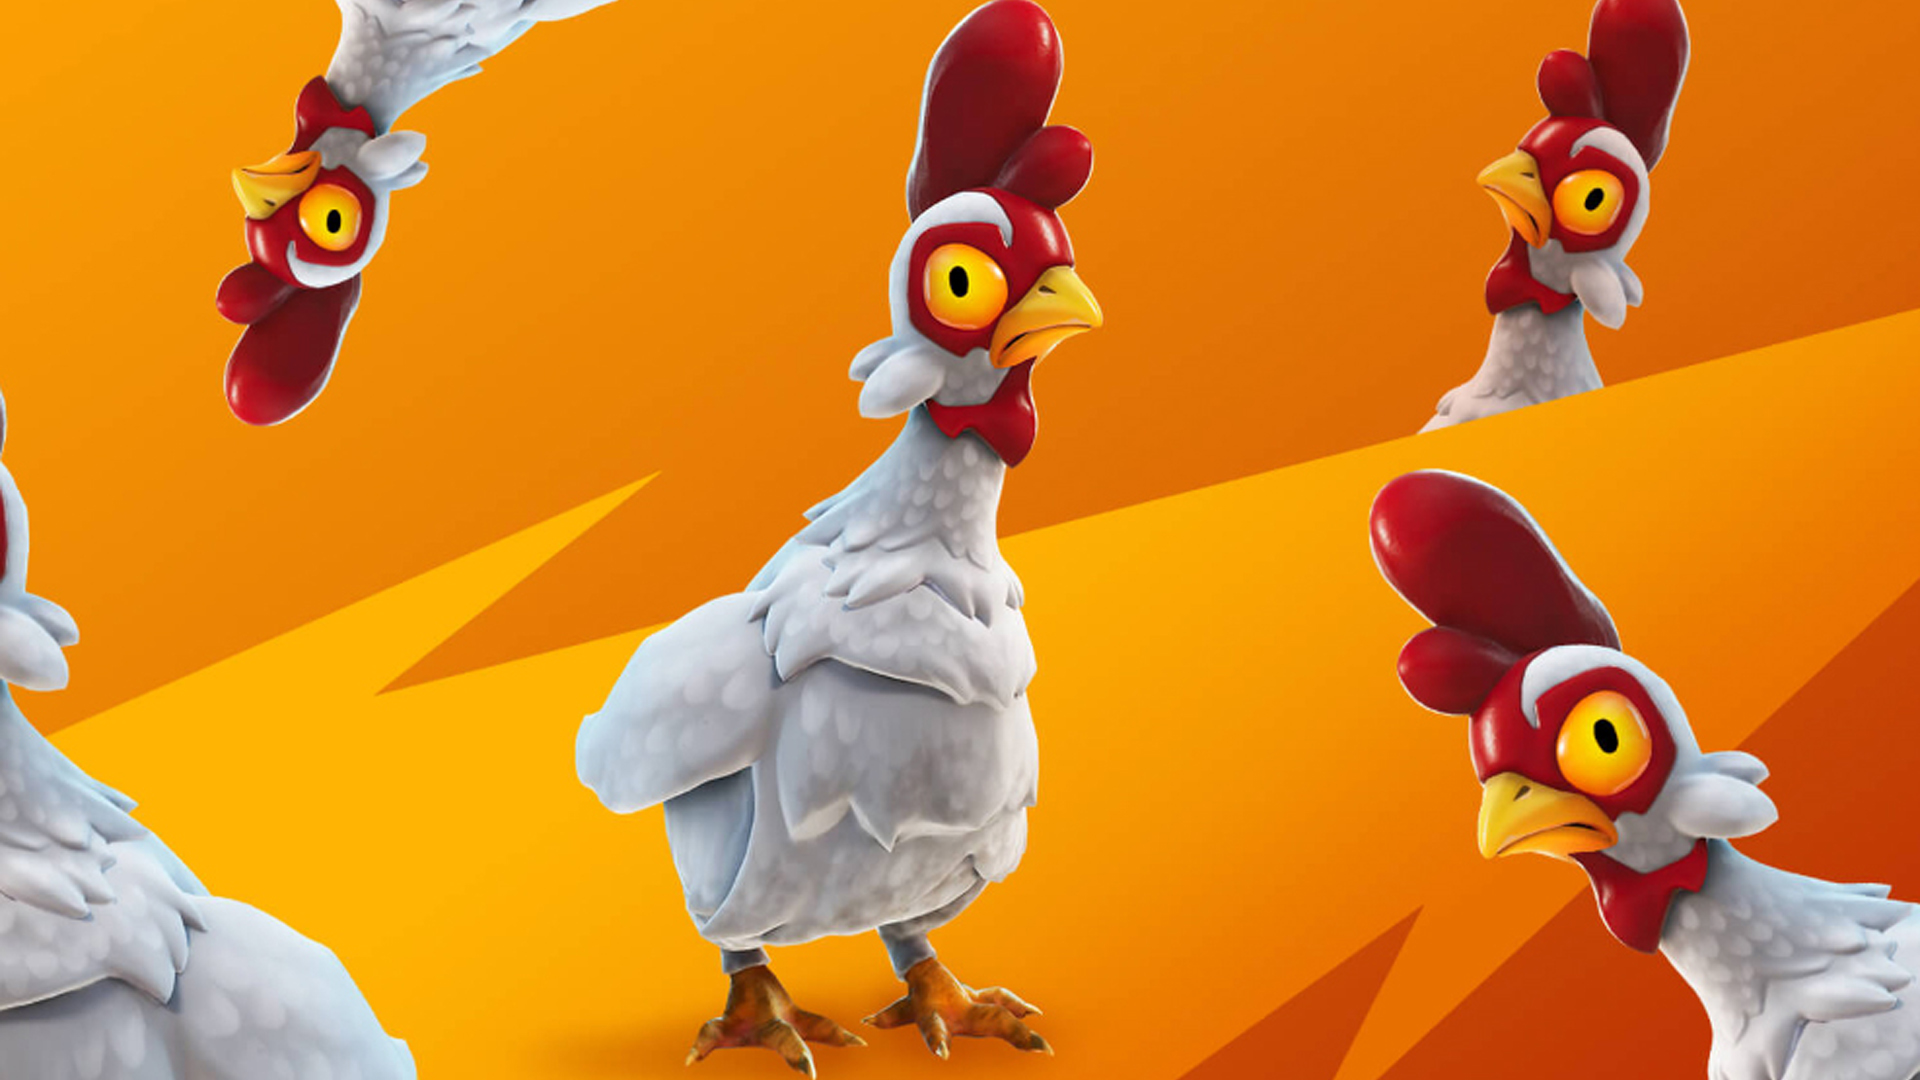 Fortnite adds killer loot chickens and axes sharks